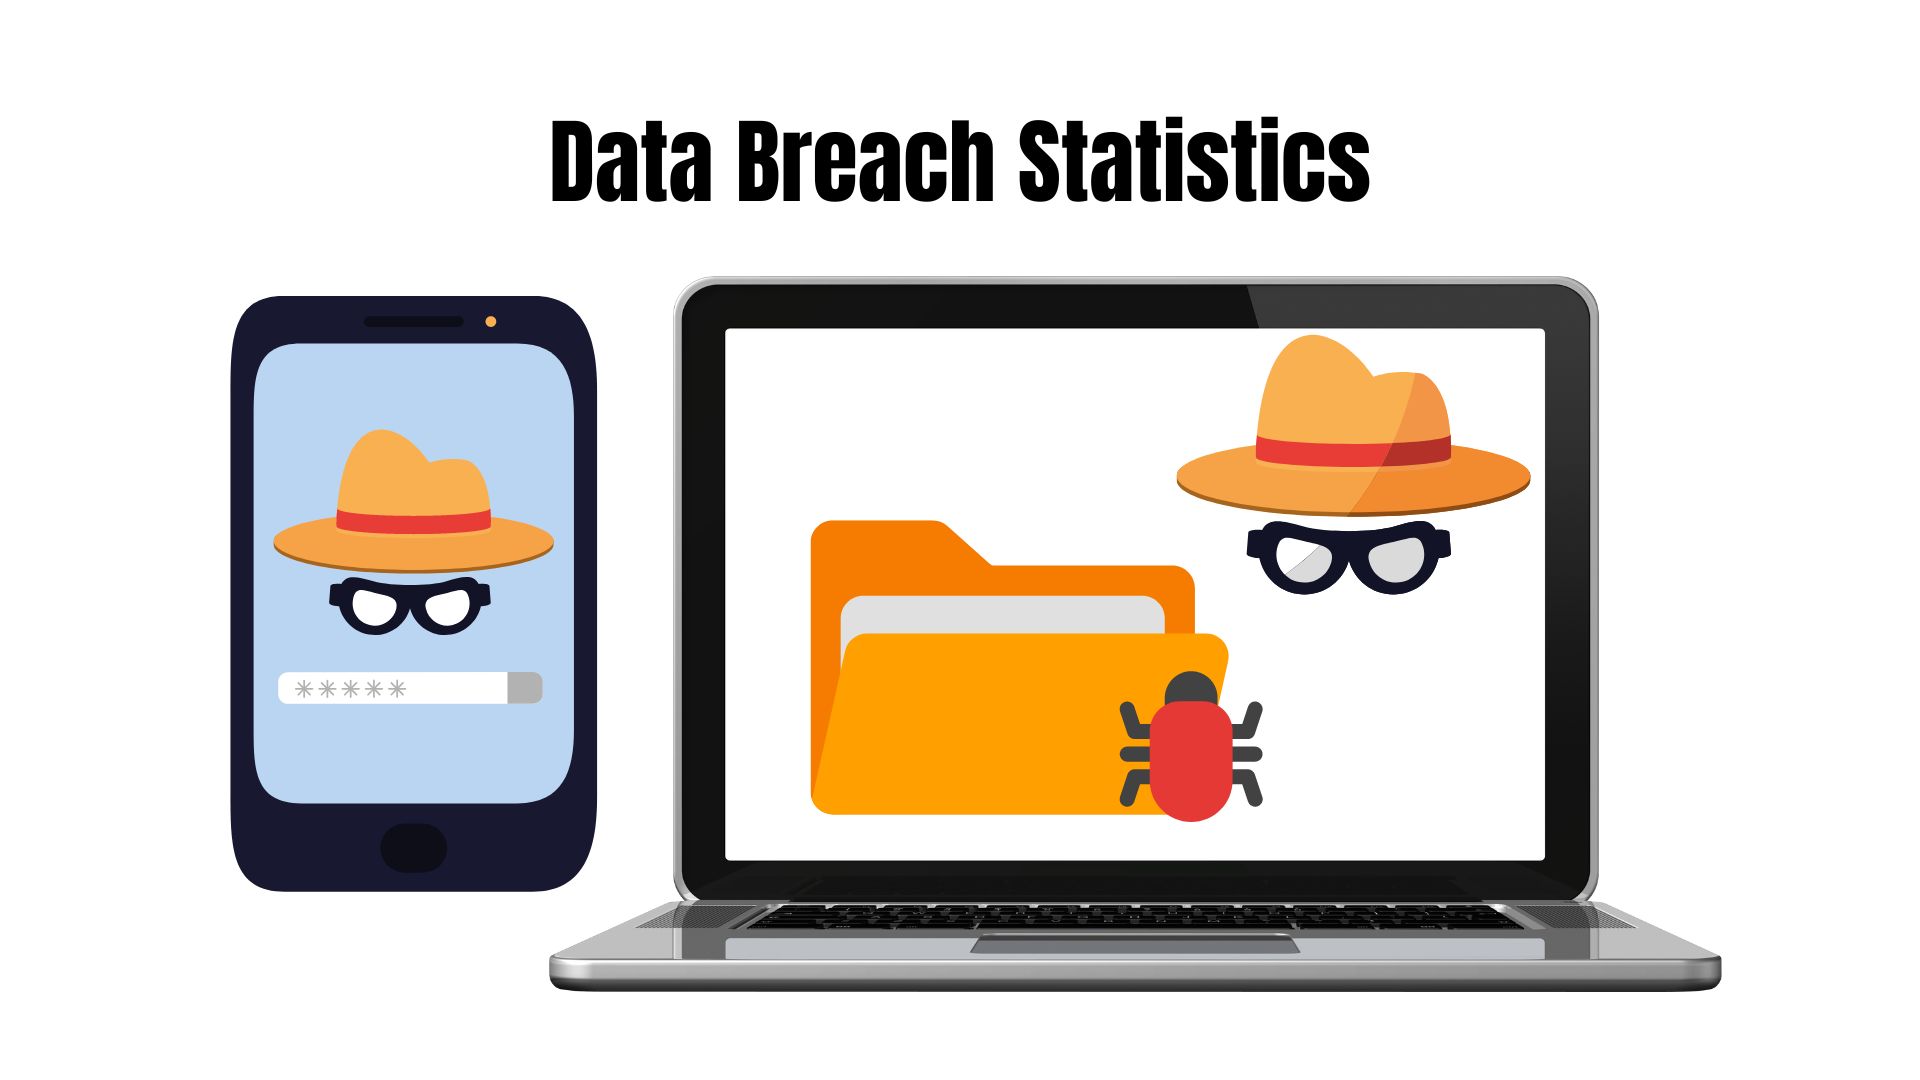 Some Critical Data Breach Statistics And Facts For People To Be Well Prepared To Fight Against Cybercrime